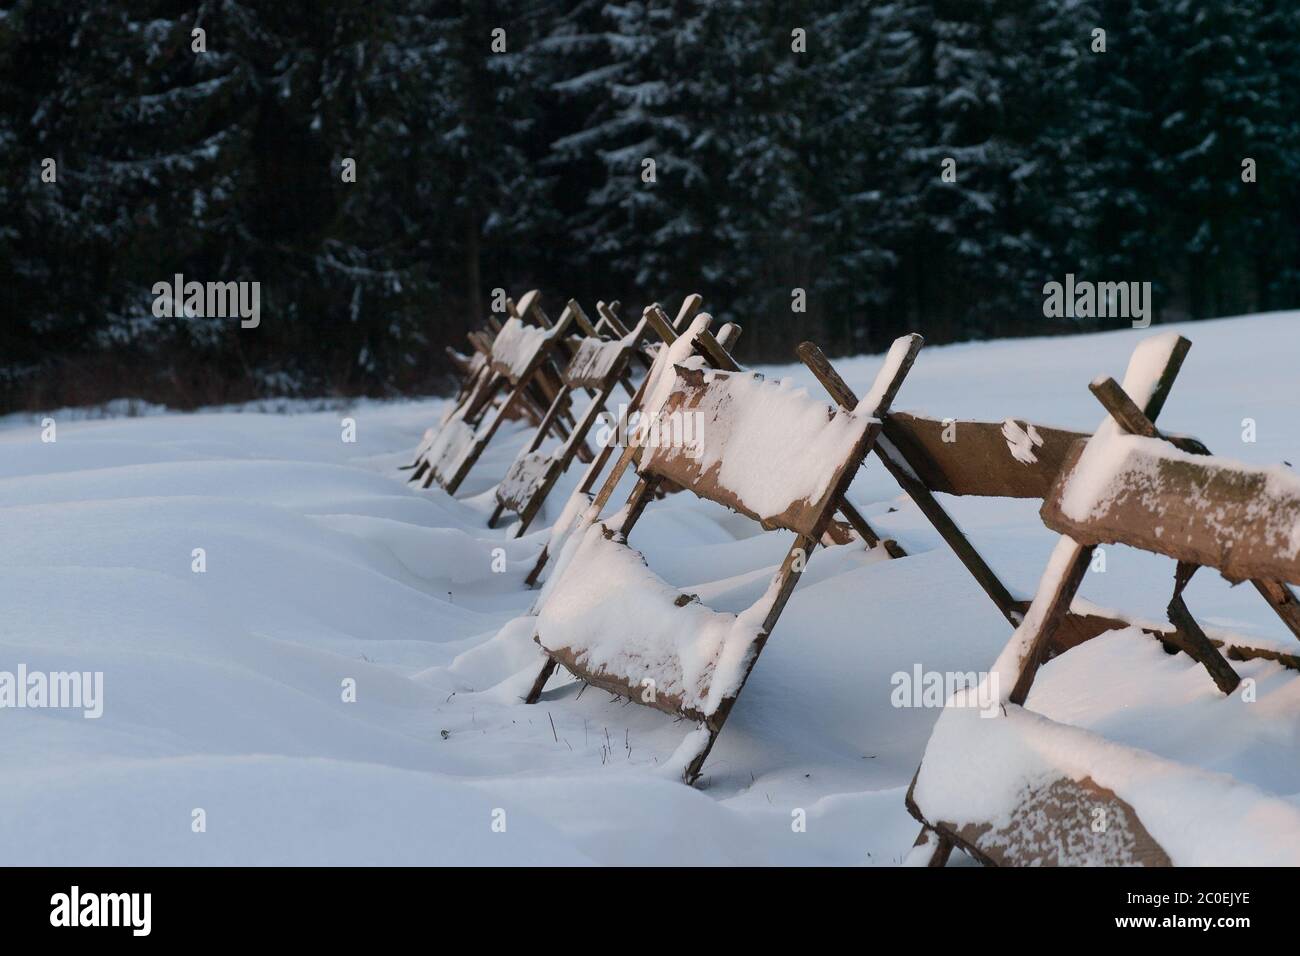 Snow fence made of wood Stock Photo